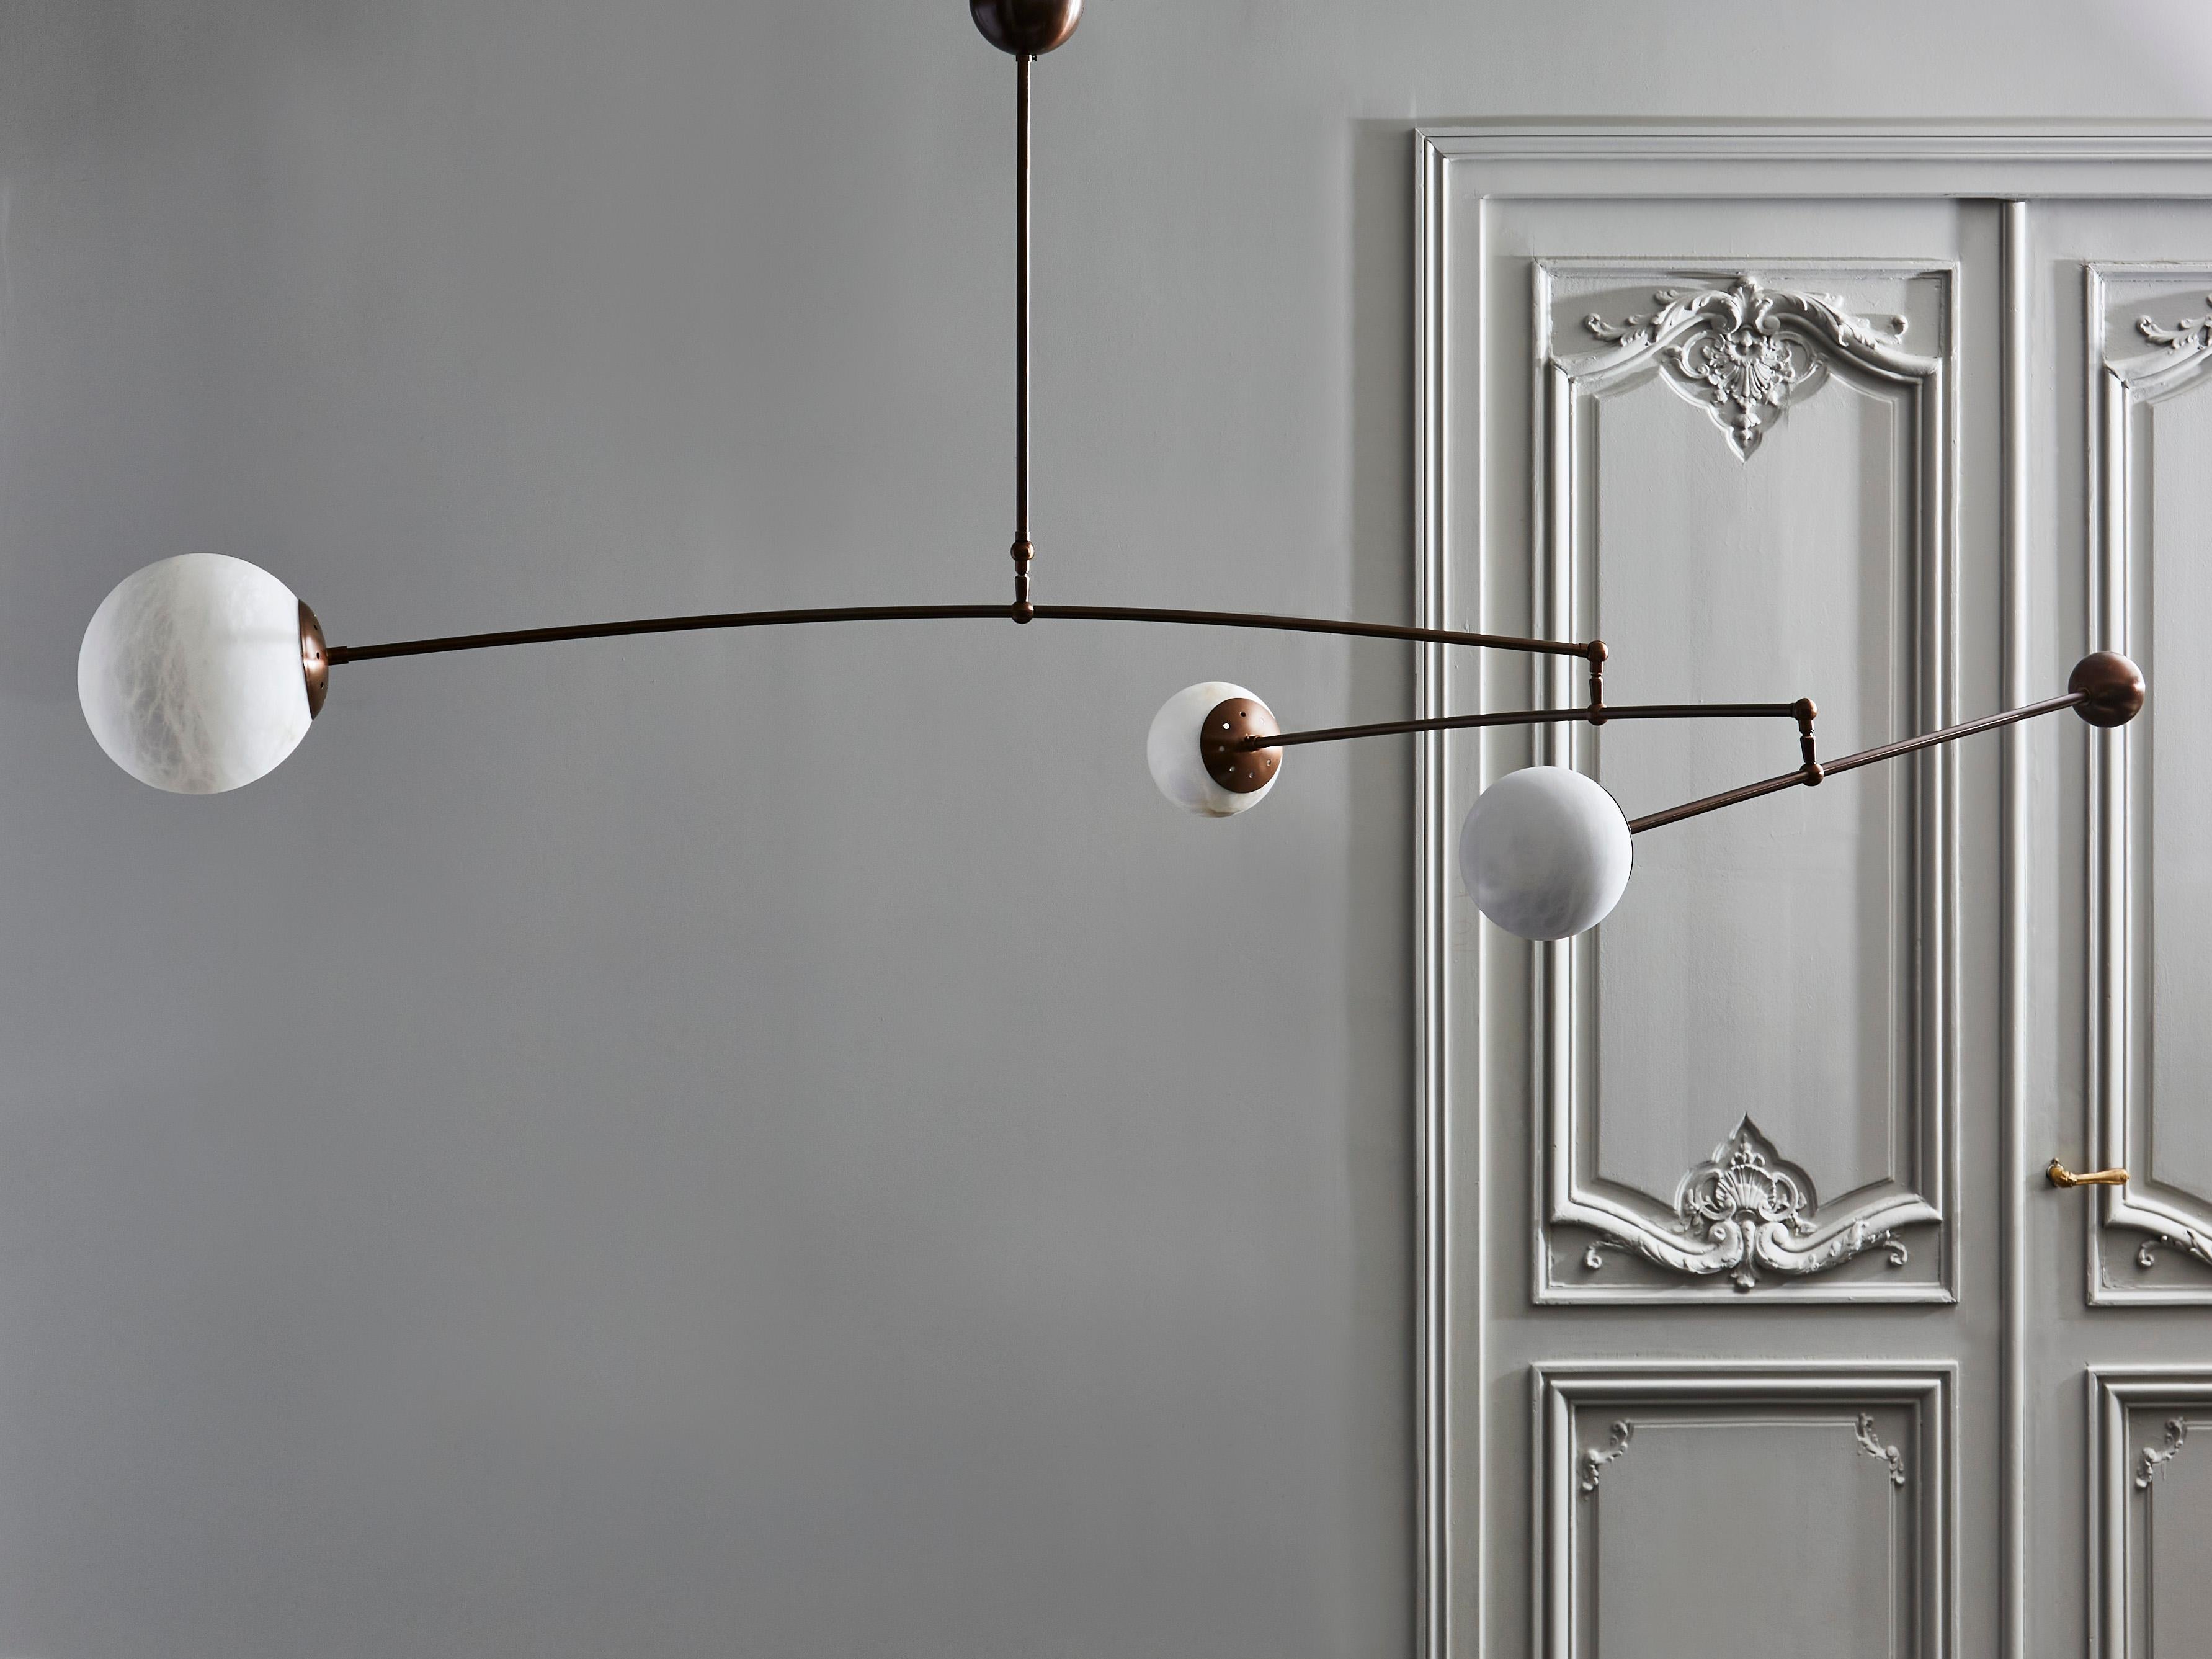 Mobile kinetic chandelier made of three patinated brass arms of light each holding different sized alabaster globes and counterweight to ensure the balance of the piece.

Original design by Glustin Luminaires.